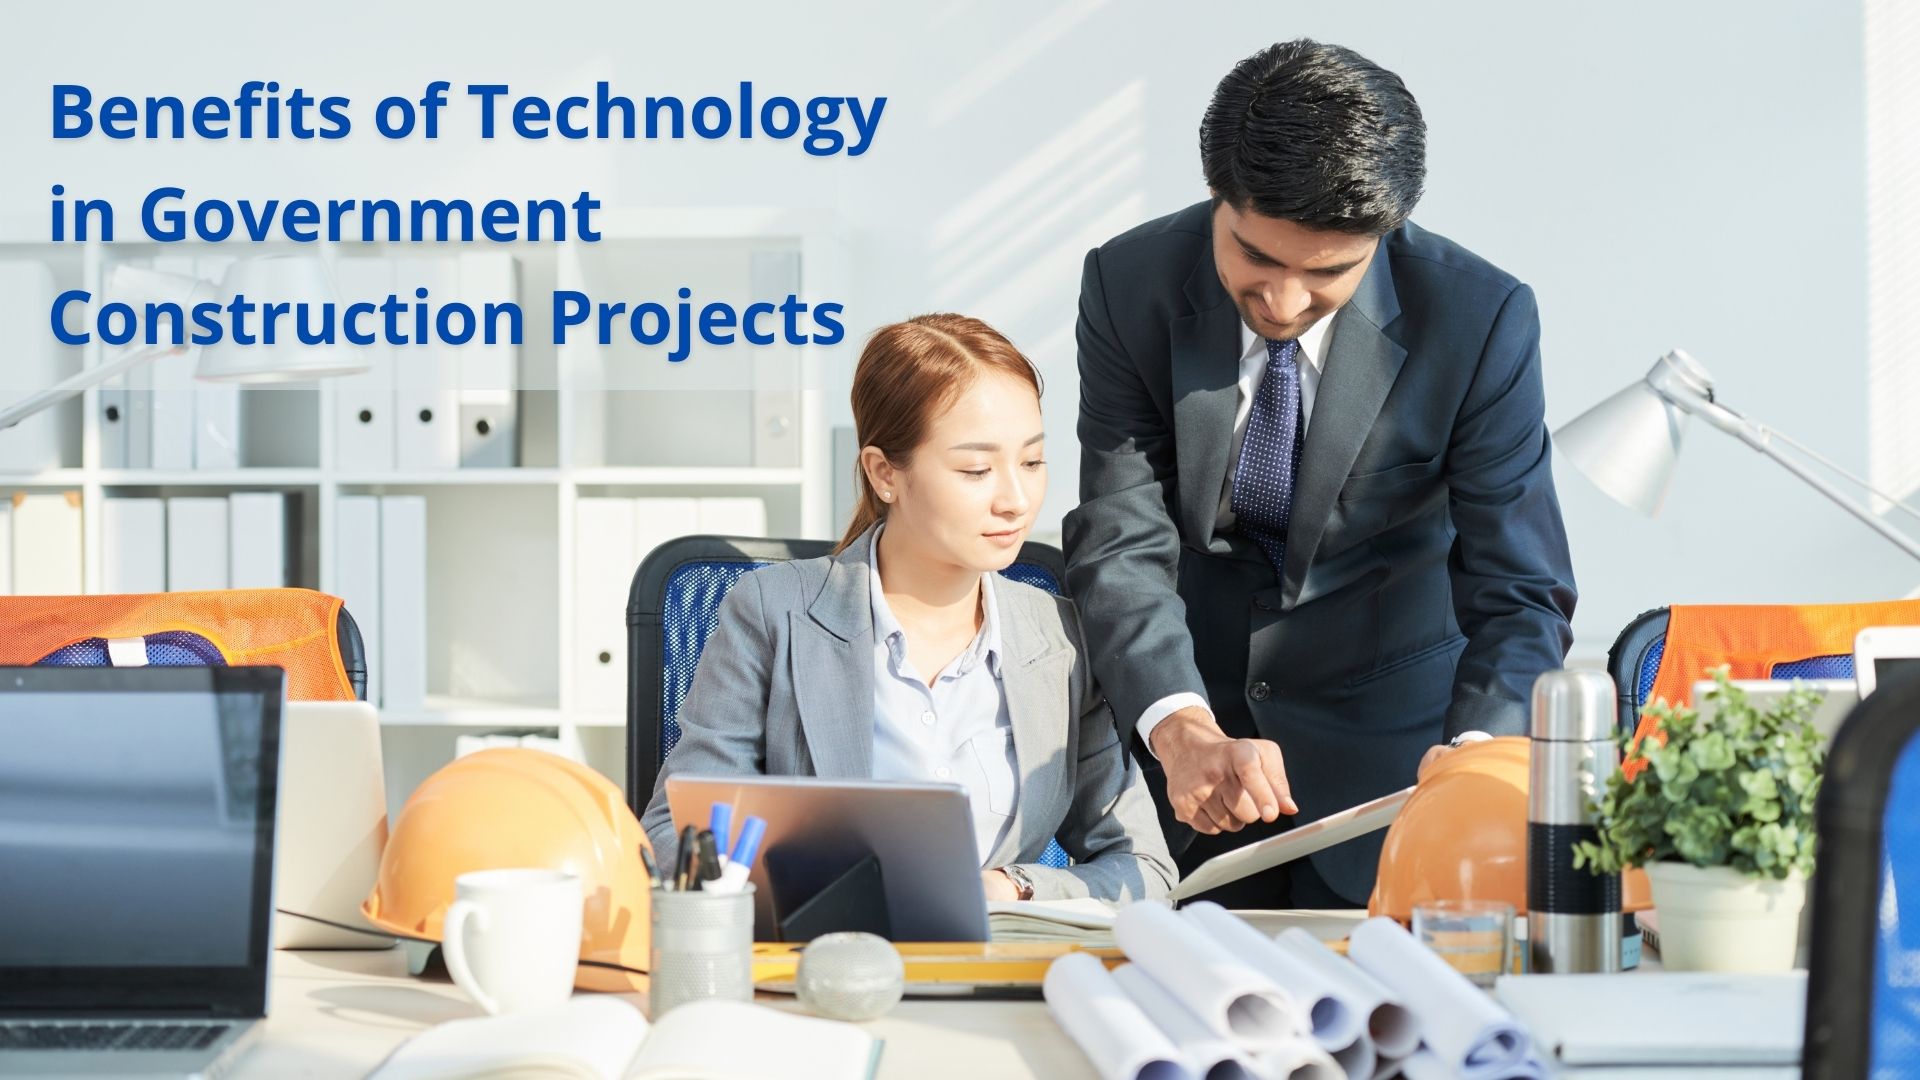 Benefits of Technology in Government Construction Projects